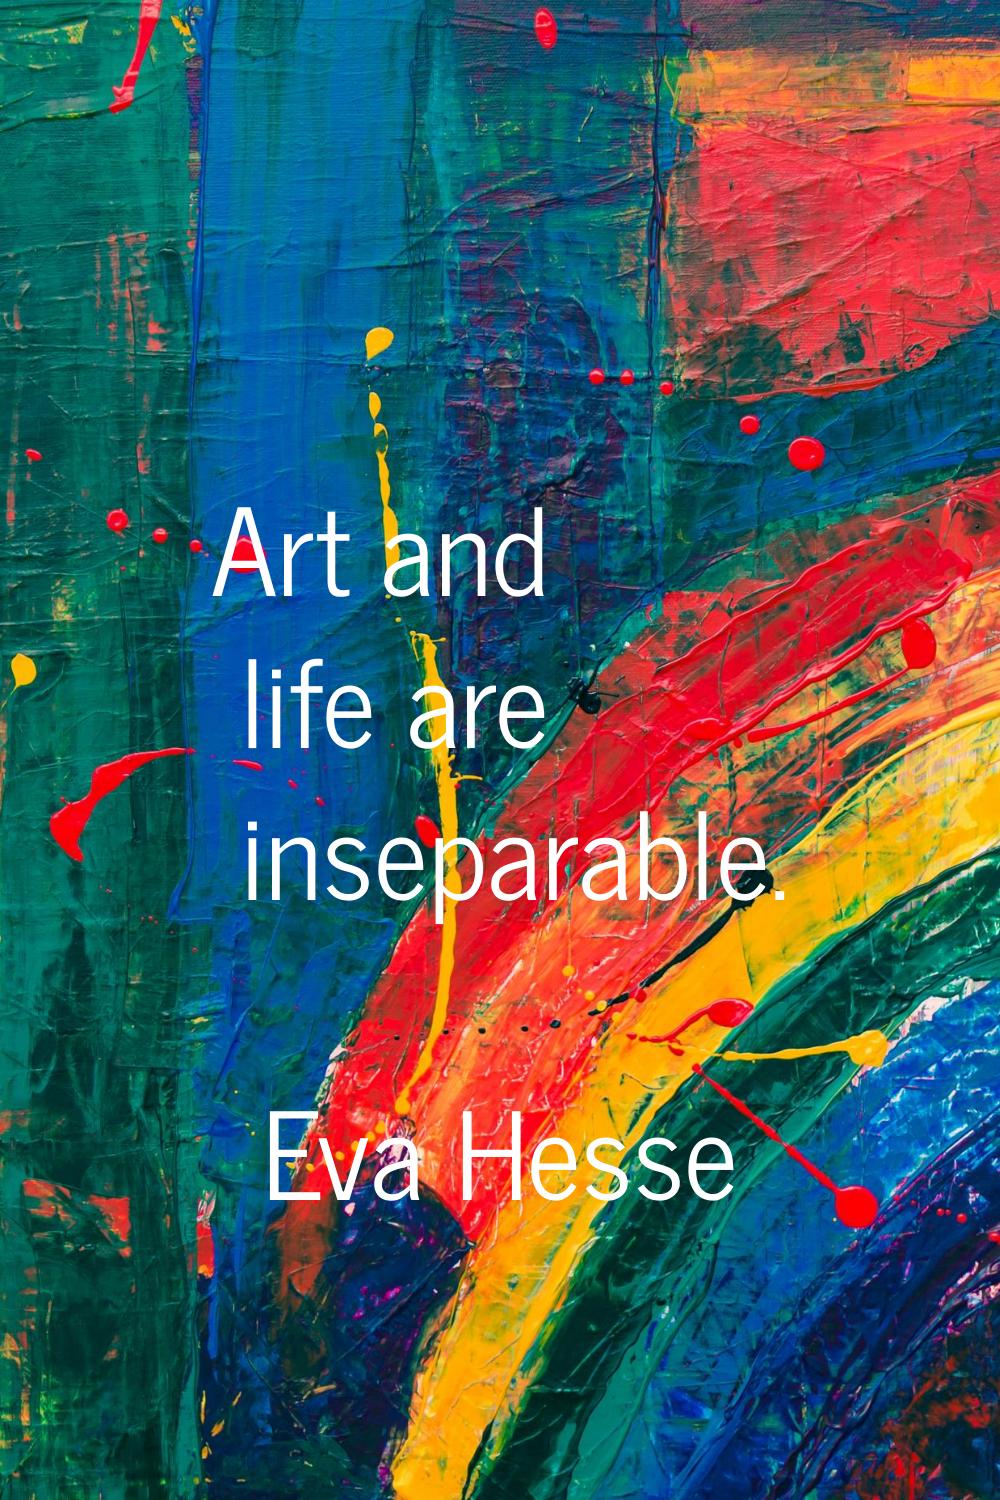 Art and life are inseparable.